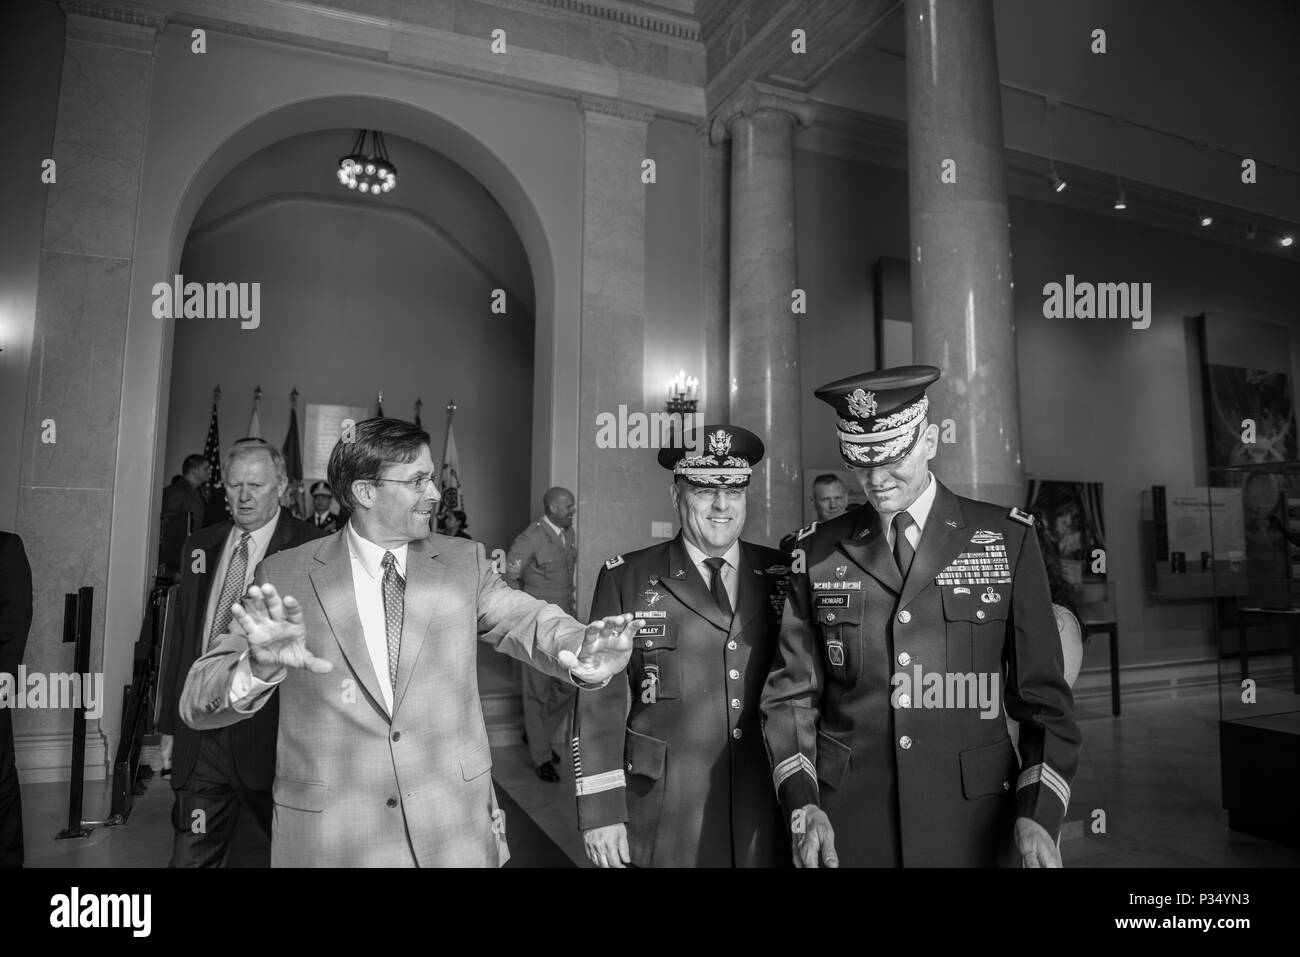 (From the left) Mark T. Esper, secretary, U.S. Army; speaks with Gen. Mark A. Milley, chief of staff, U.S. Army;  and Maj. Gen. Michael Howard, commanding general, U.S. Army Military District of Washington inside of the Memorial Amphitheater Display Room before participating an Army Full Honors Wreath-Laying Ceremony at the Tomb of the Unknown Soldier in honor of the U.S. Army’s 243rd birthday at Arlington National Cemetery, Arlington, Virginia, June 14, 2018. (U.S. Army photo by Elizabeth Fraser / Arlington National Cemetery / released) Stock Photo